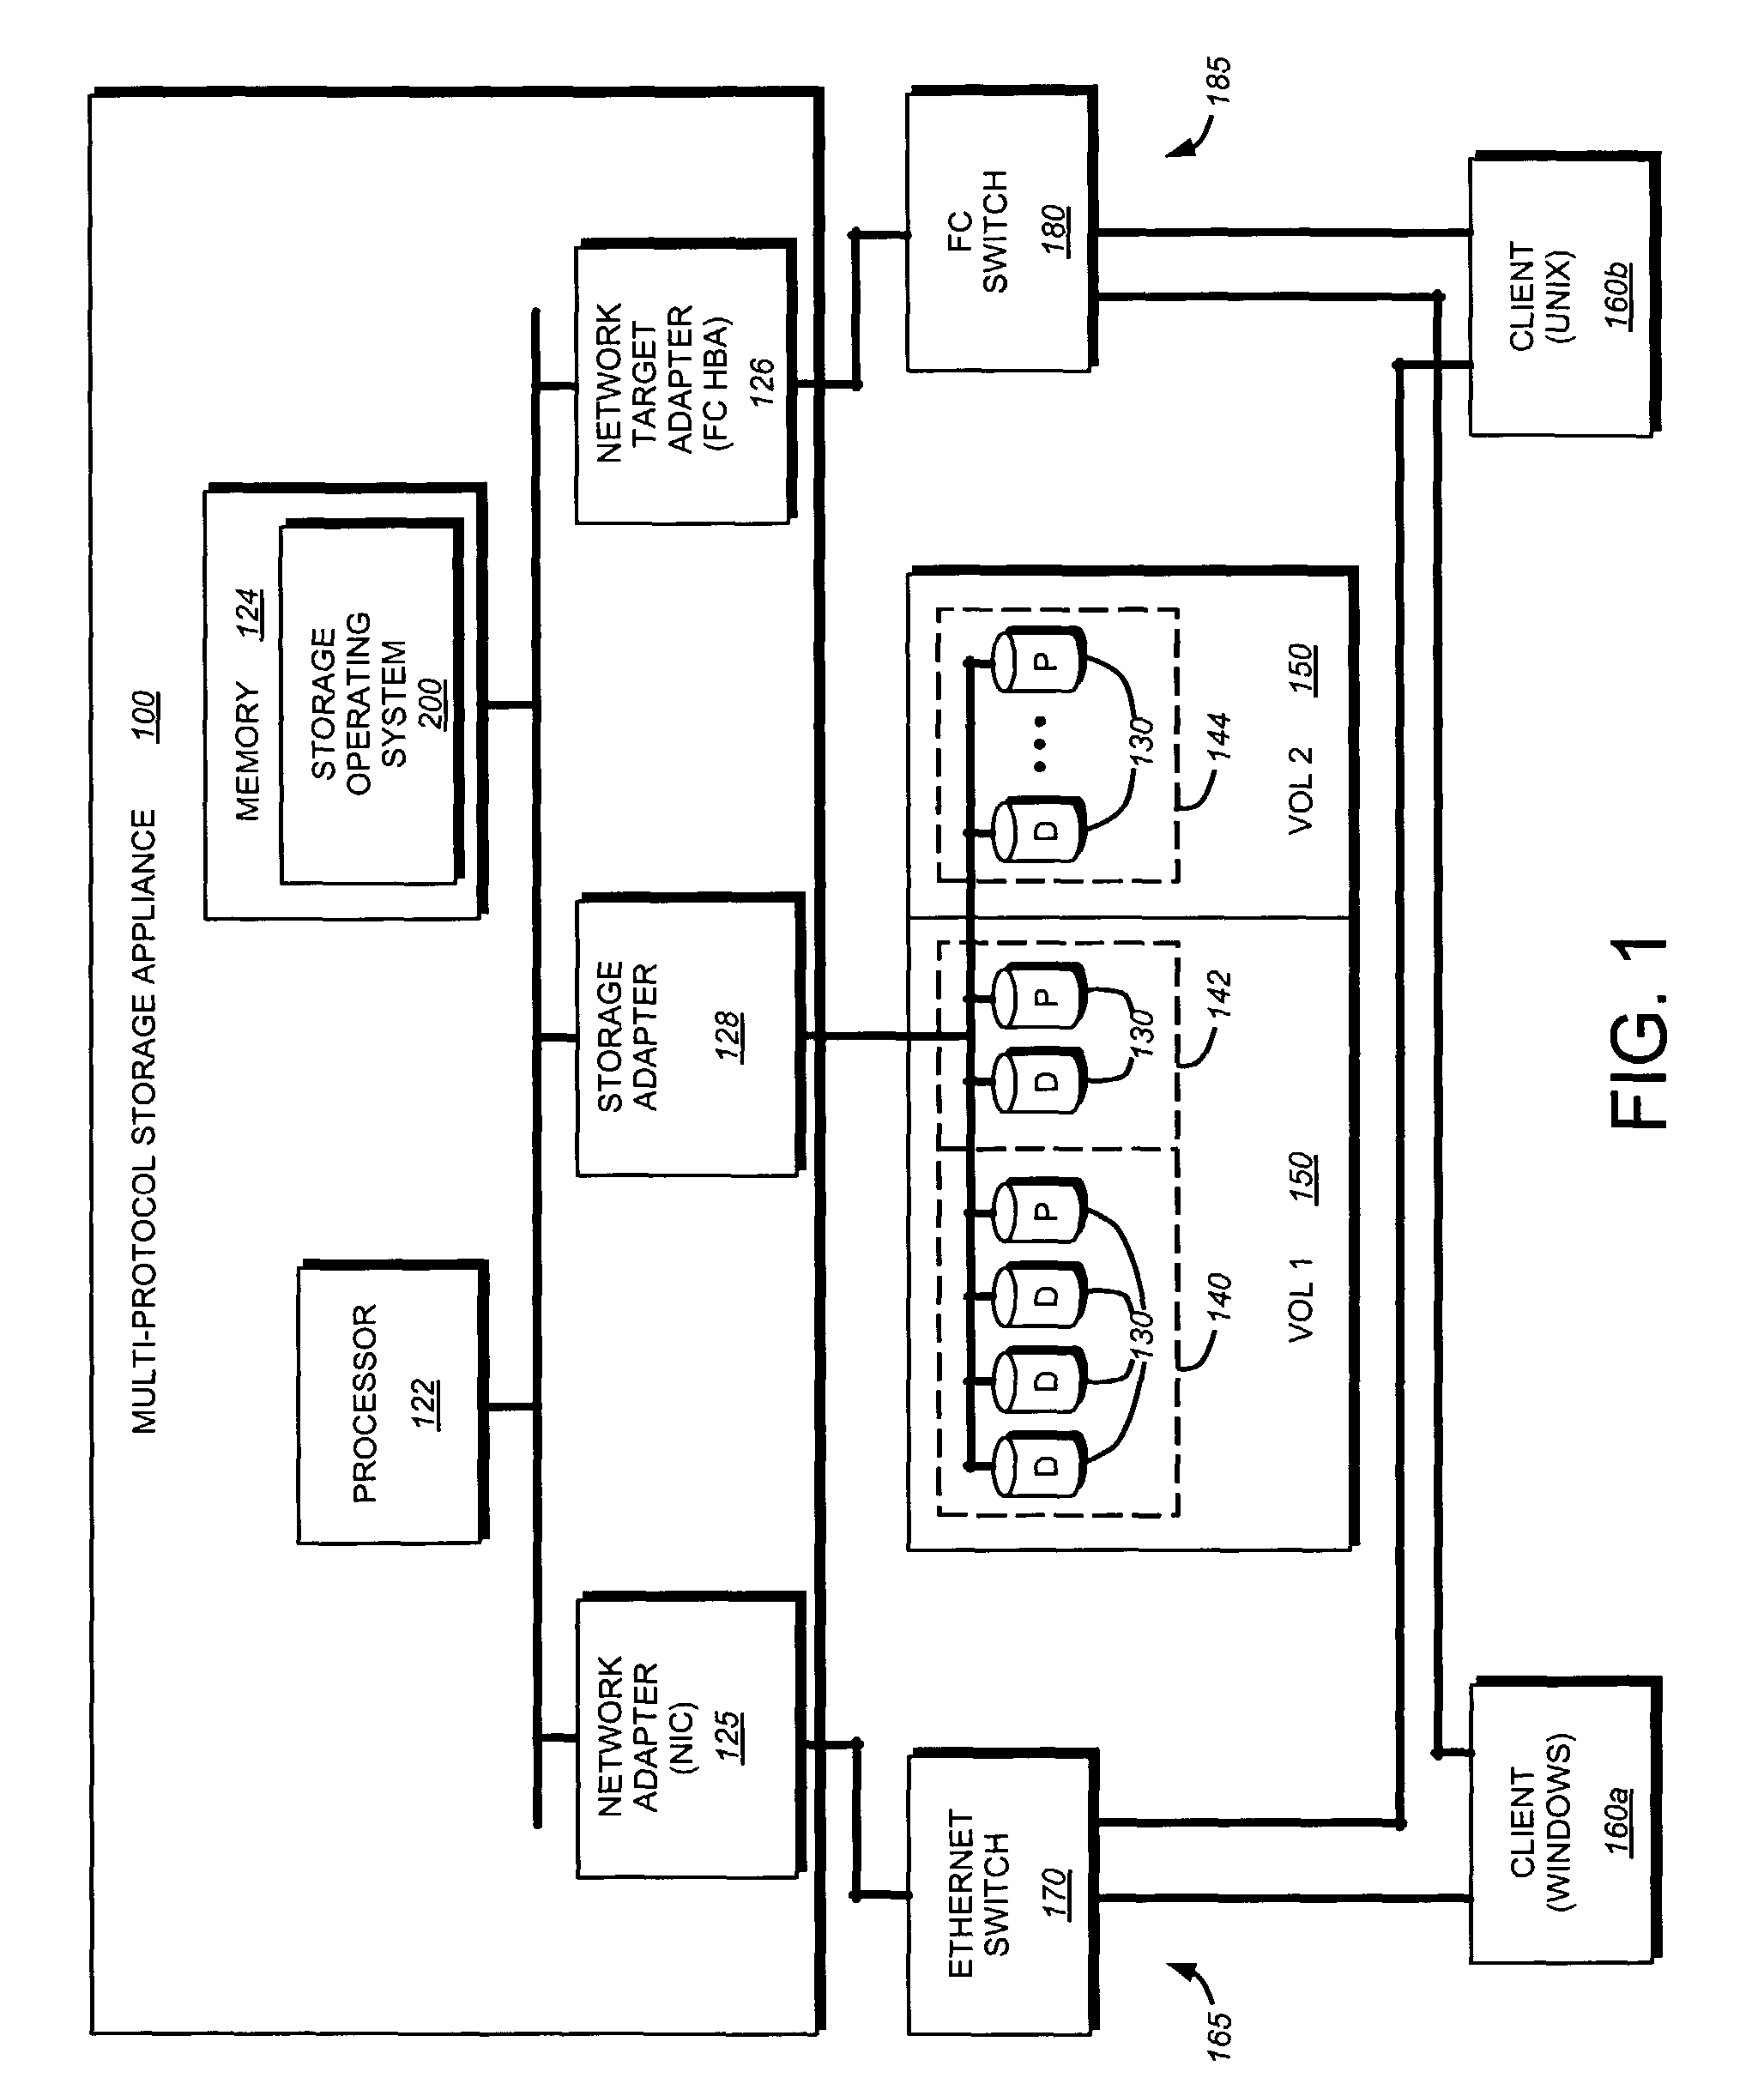 Multi-protocol storage appliance that provides integrated support for file and block access protocols